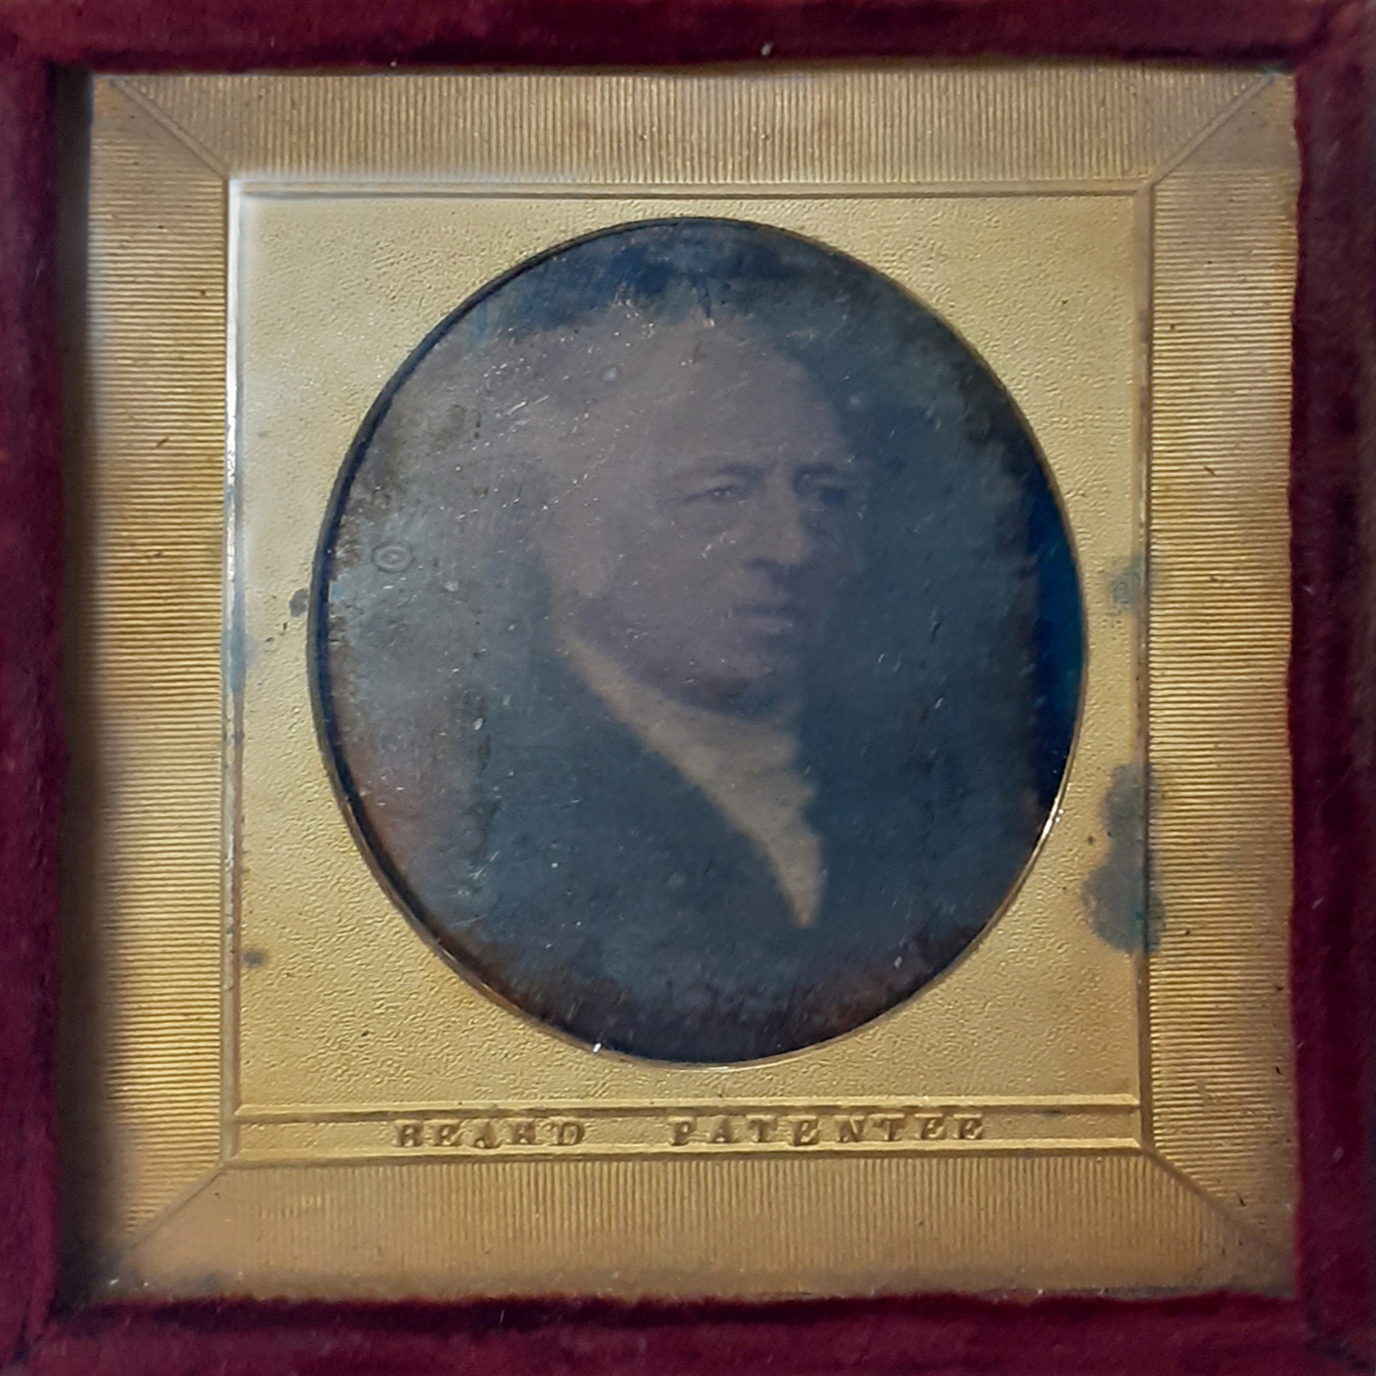 One of the original daguerreotypes discovered in the archive